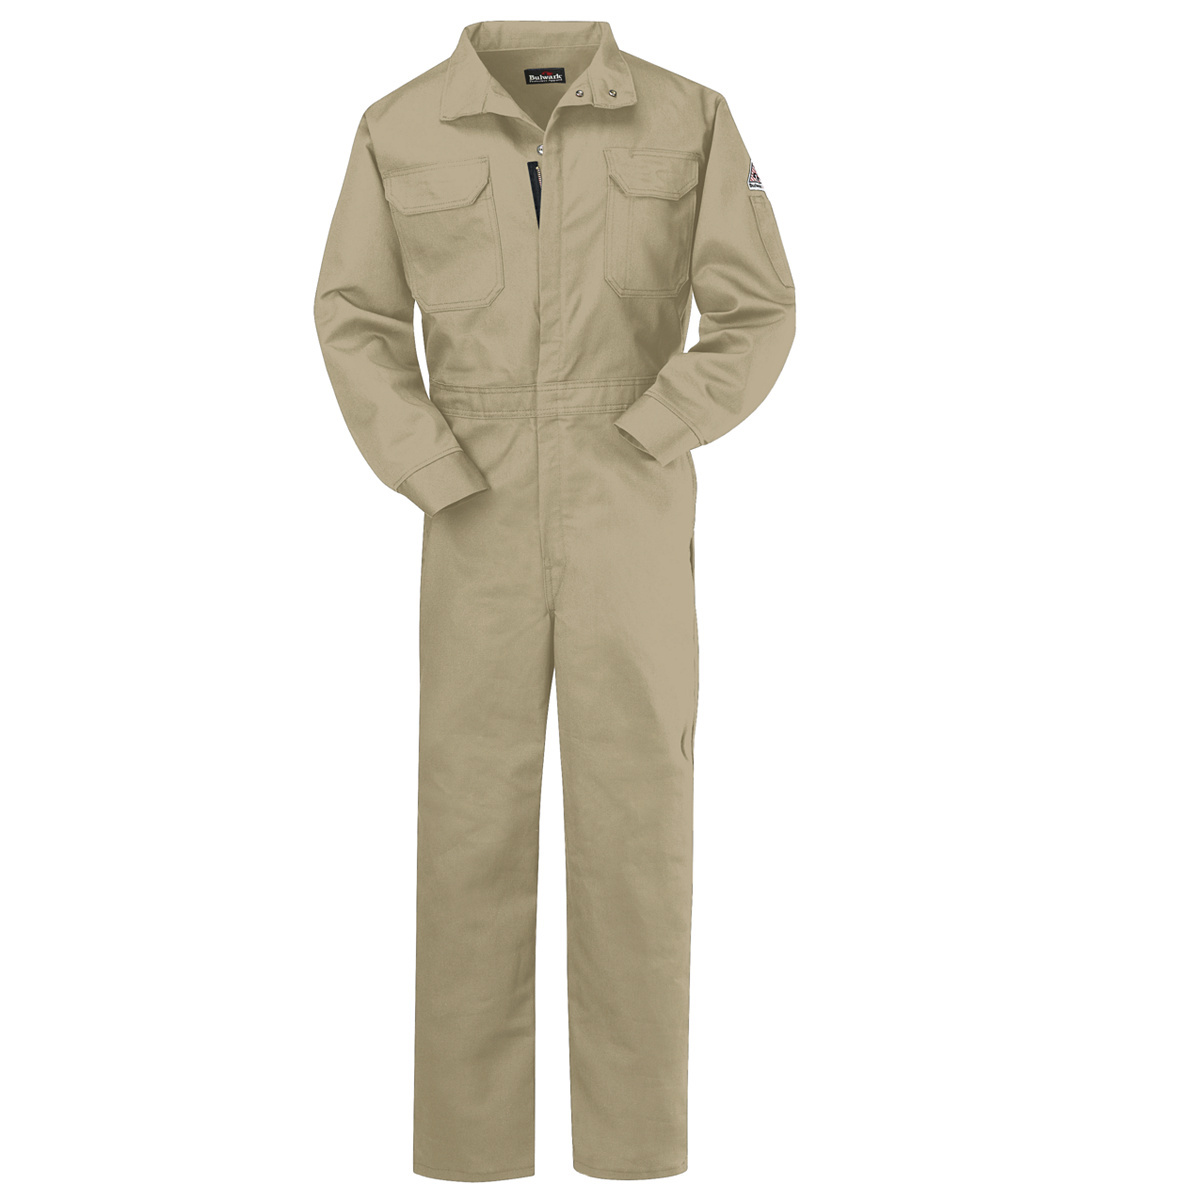 Bulwark® Small| Regular Khaki Westex Ultrasoft® Twill/Cotton/Nylon Flame Resistant Coveralls With Zipper Front Closure